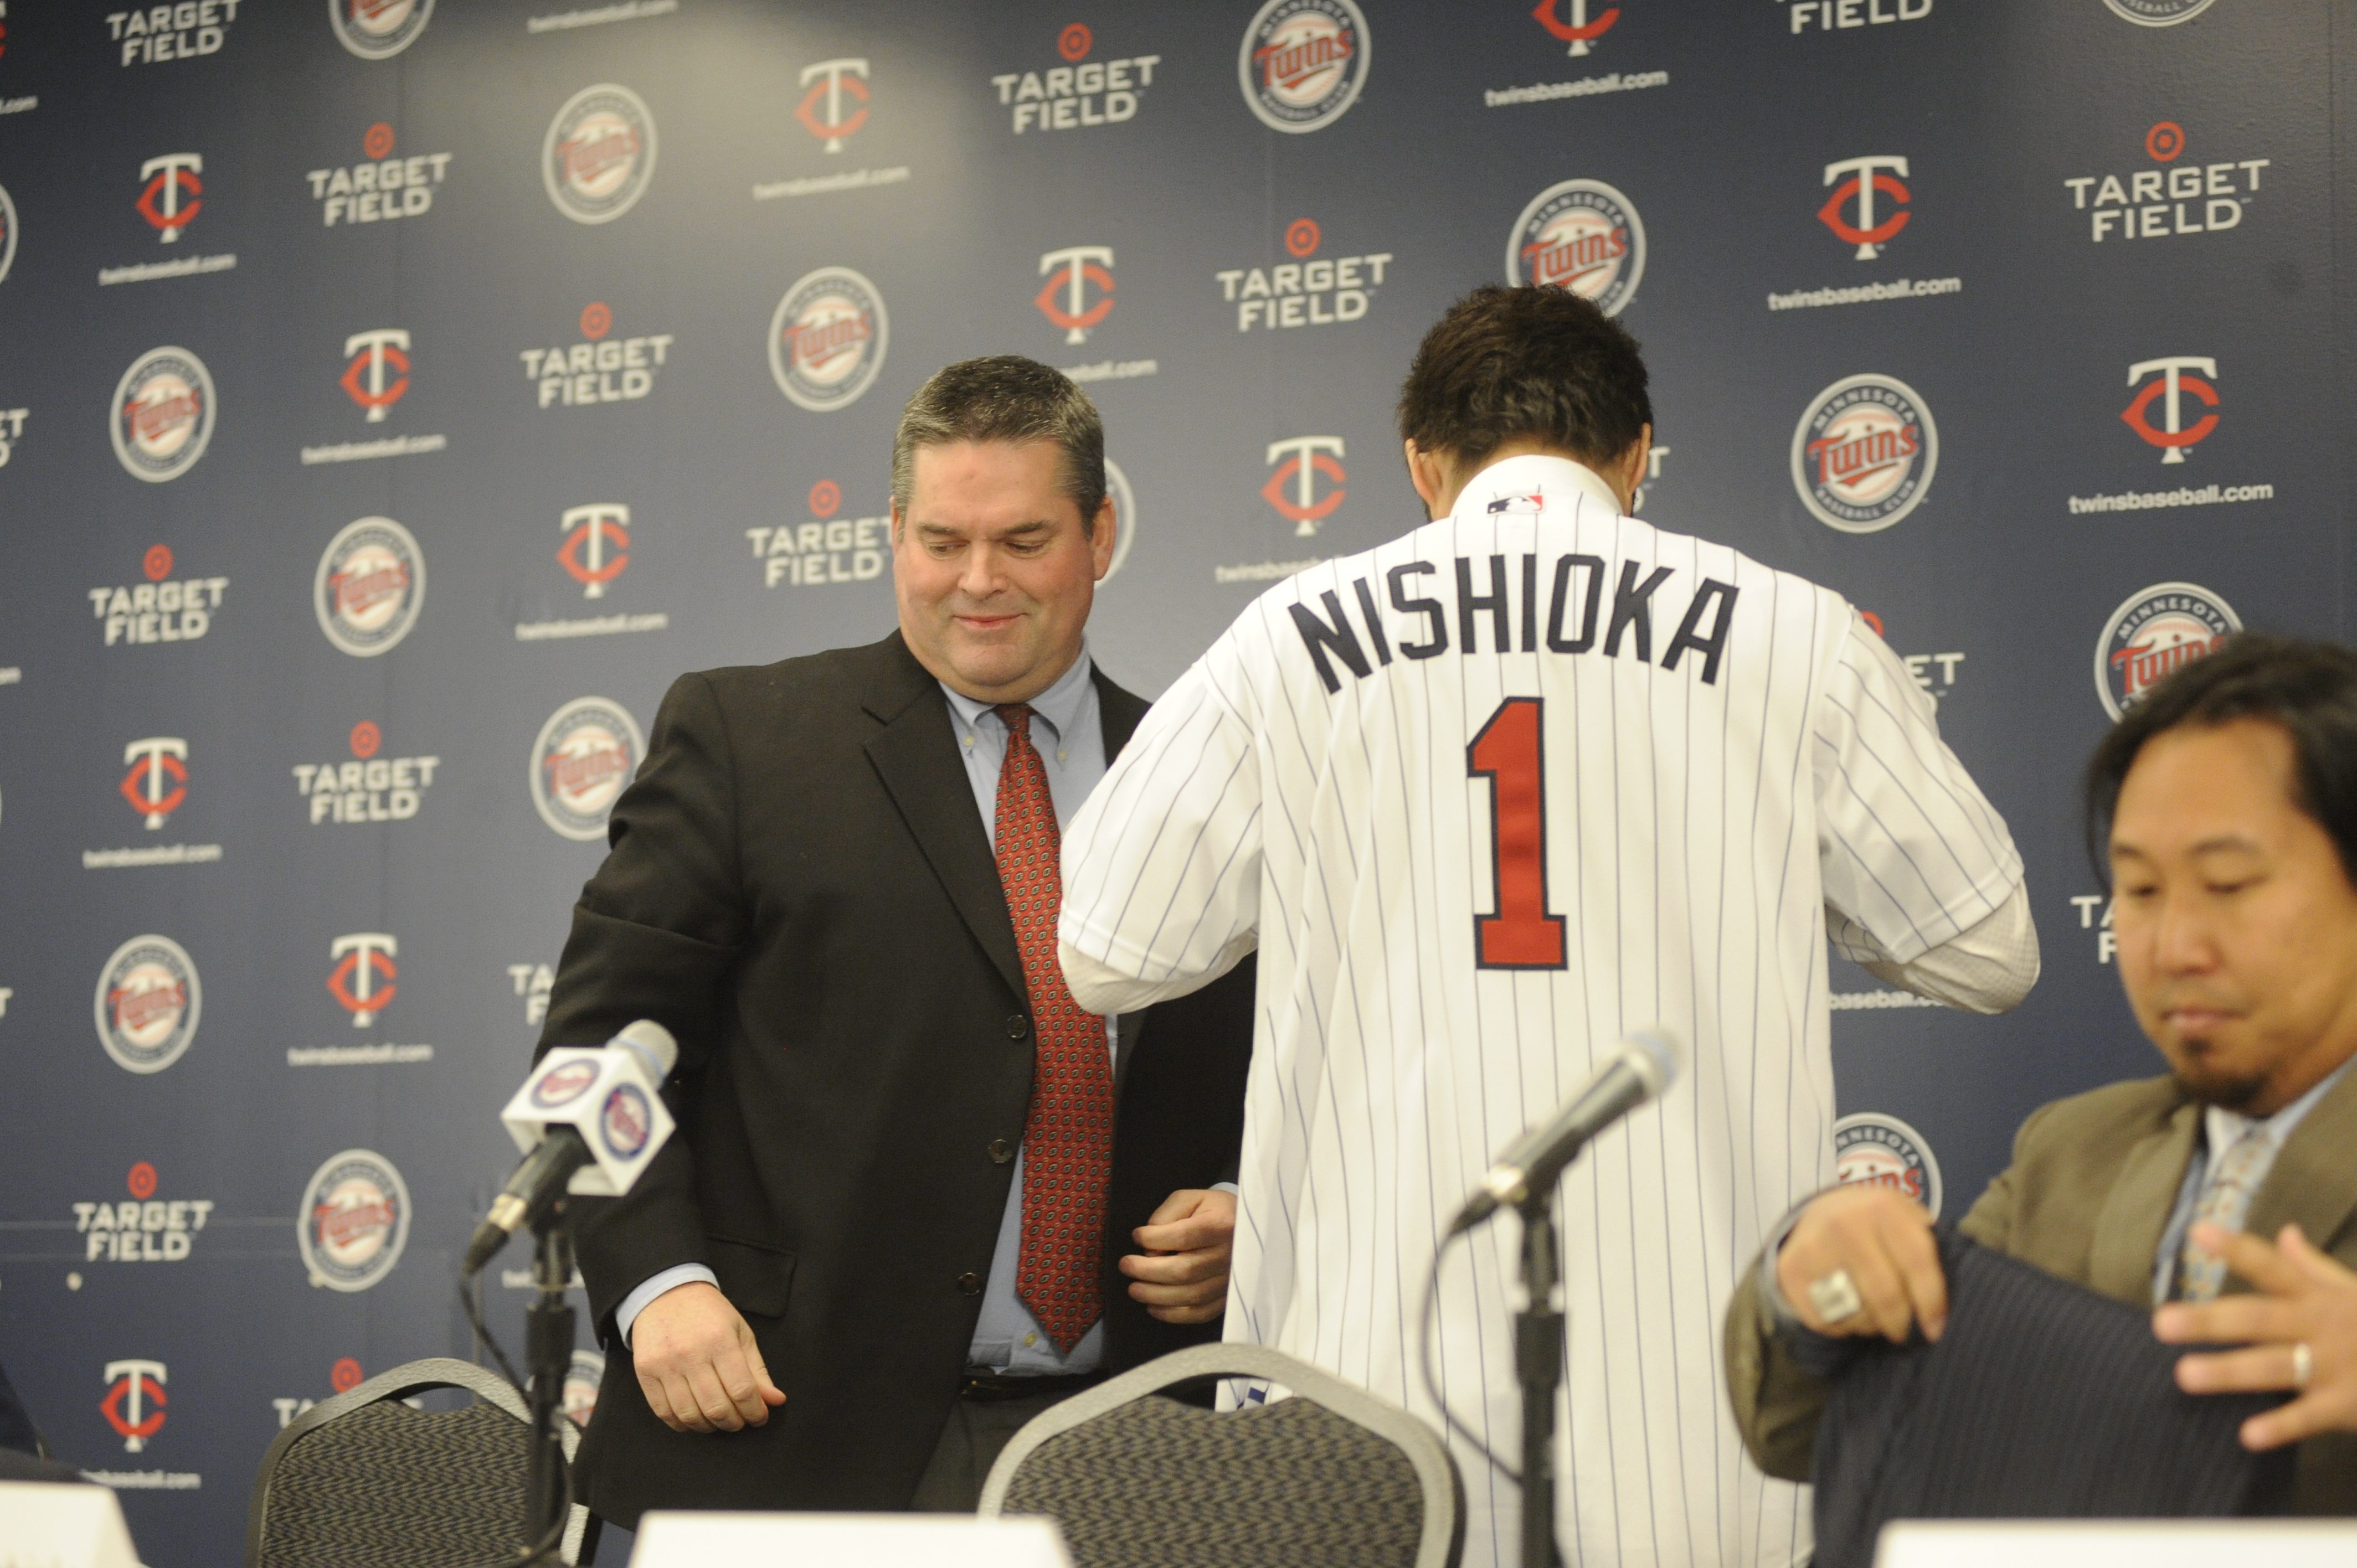 MINNEAPOLIS, MN - DECEMBER 18: Tsuyoshi Nishioka # of the Minnesota Twins puts on his first Twins jersey during a press conference on December 18, 2010 at Target Field in Minneapolis, Minnesota. (Photo by Hannah Foslien /Getty Images)